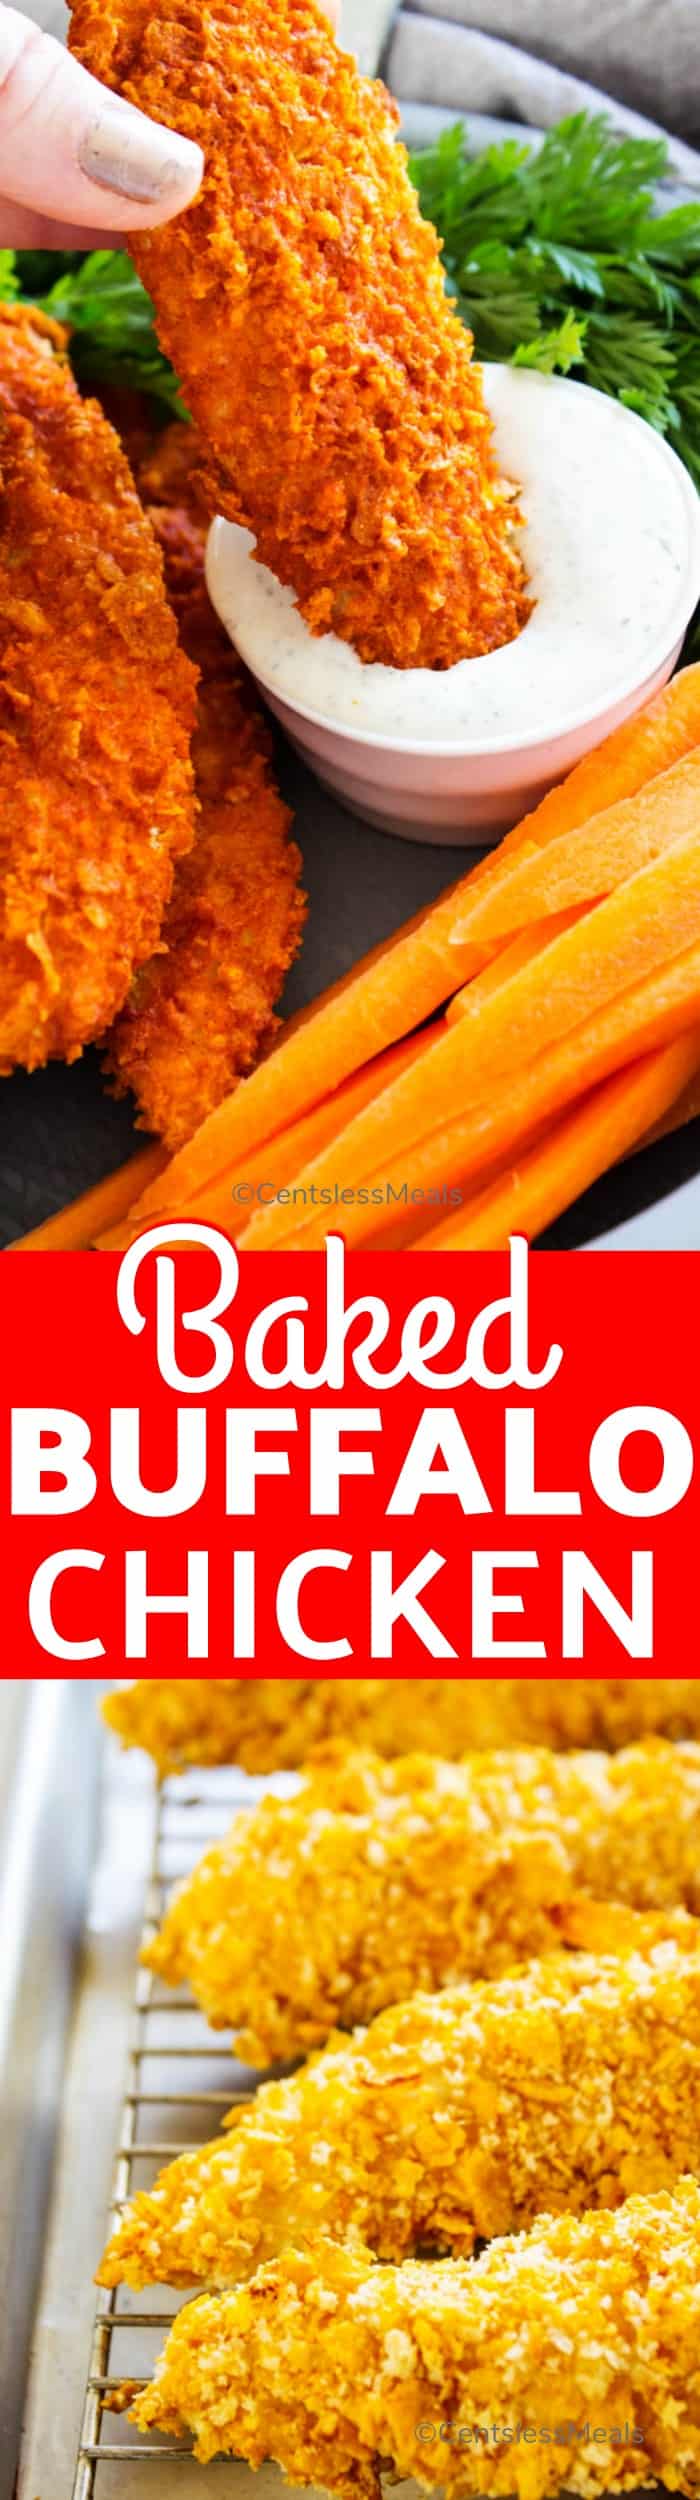 Baked buffalo chicken on a sheet pan and being dipped with a title